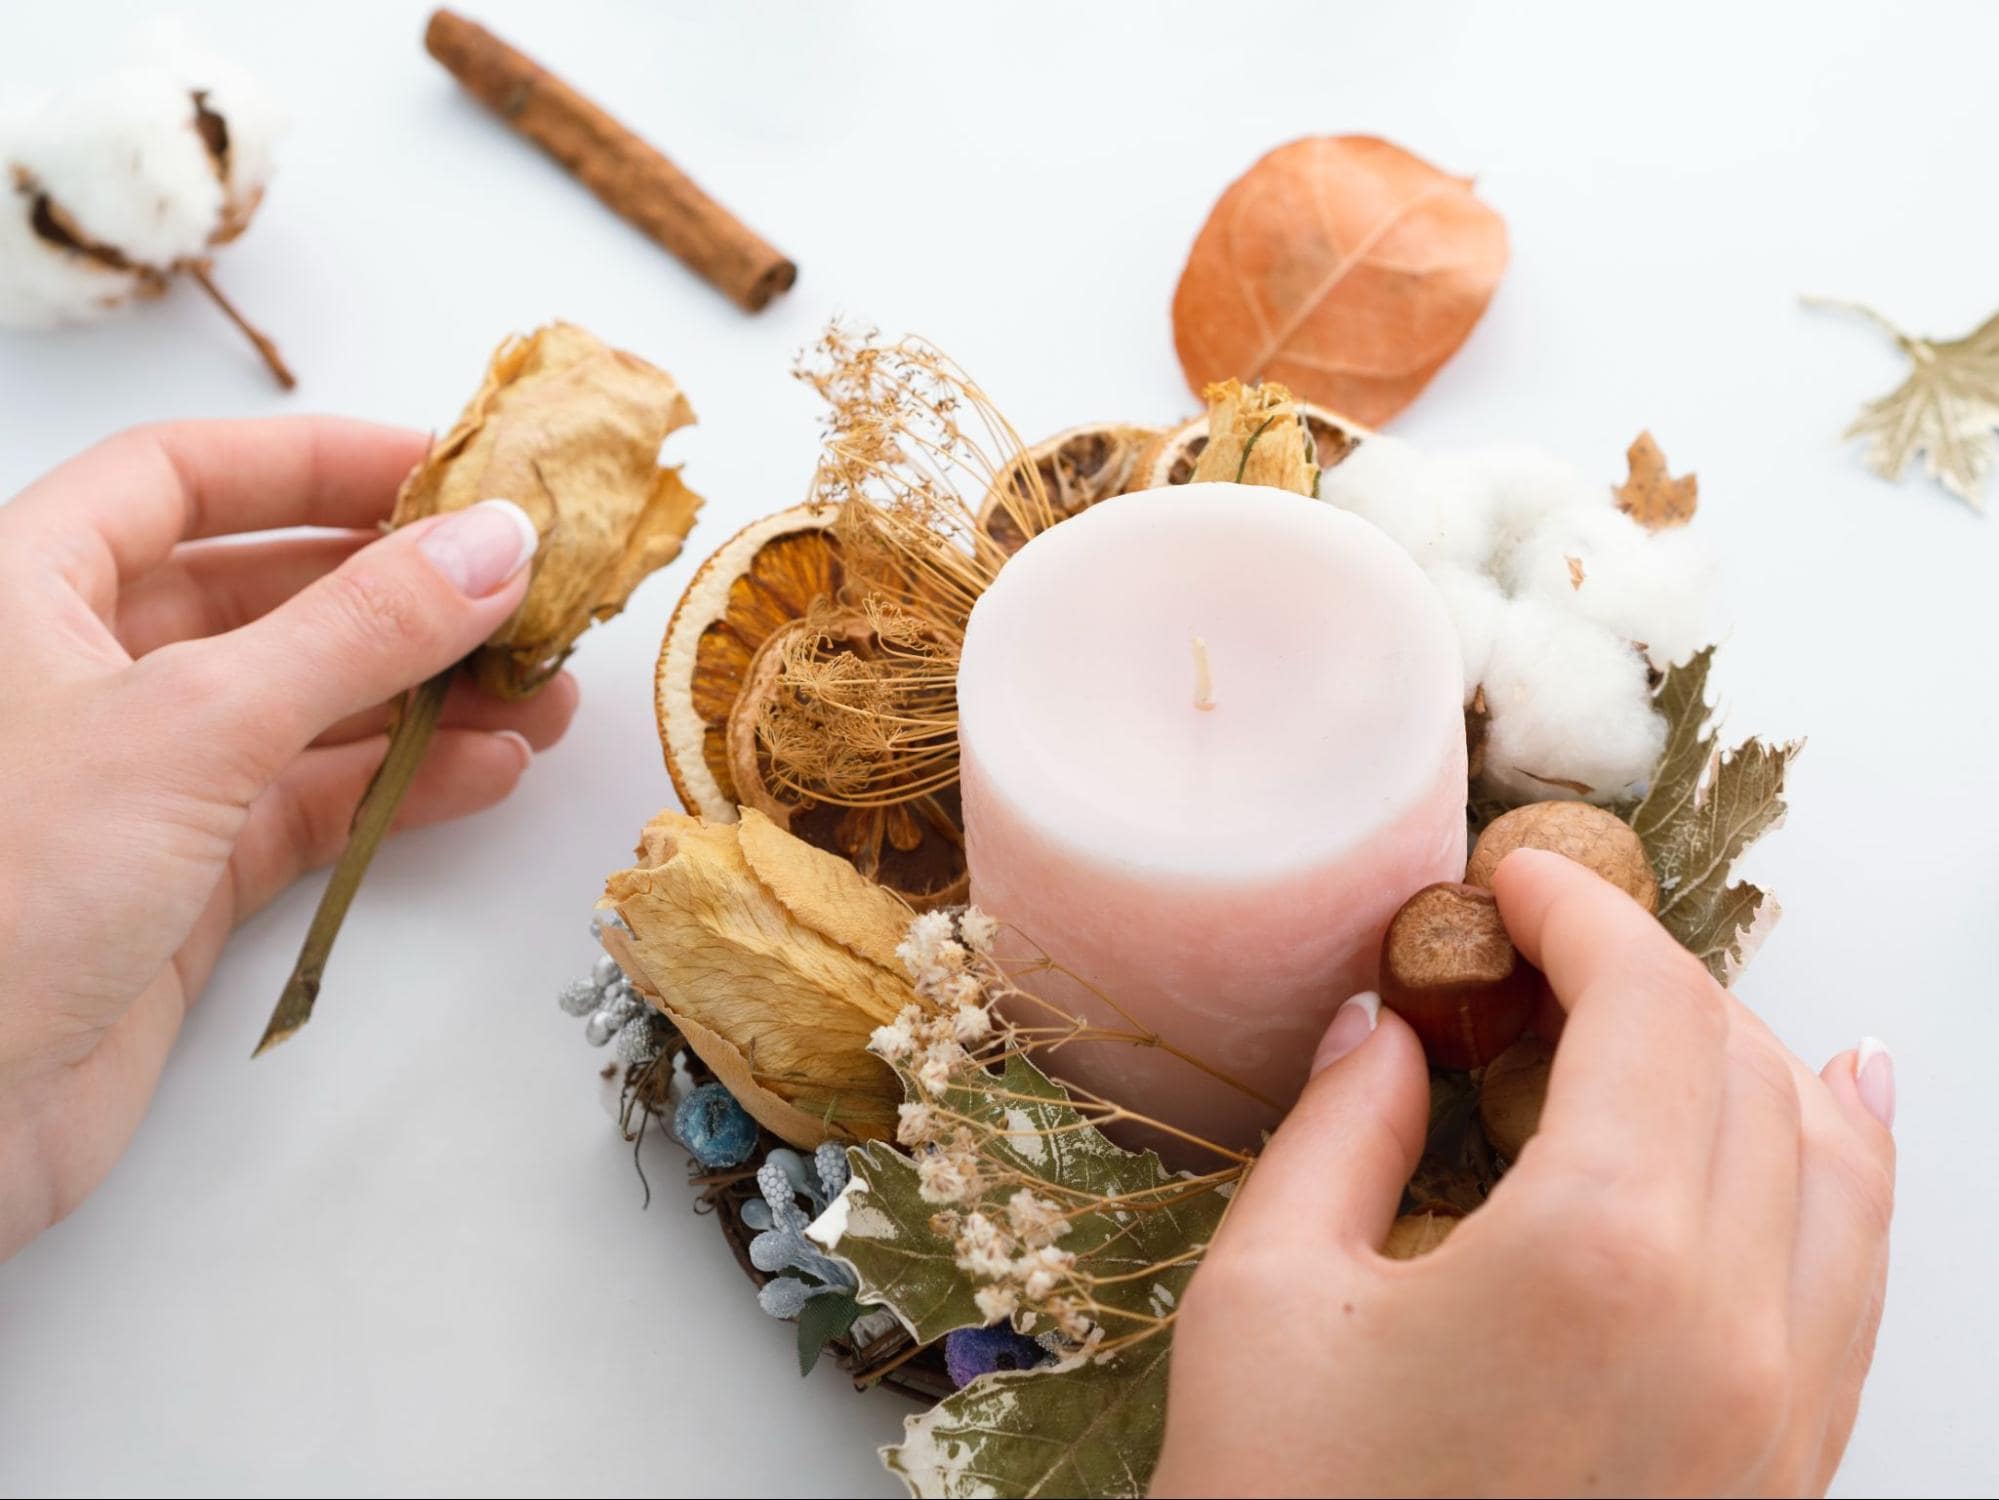 Handcrafting a decorative candle, a warm and romantic gift for your girlfriend.